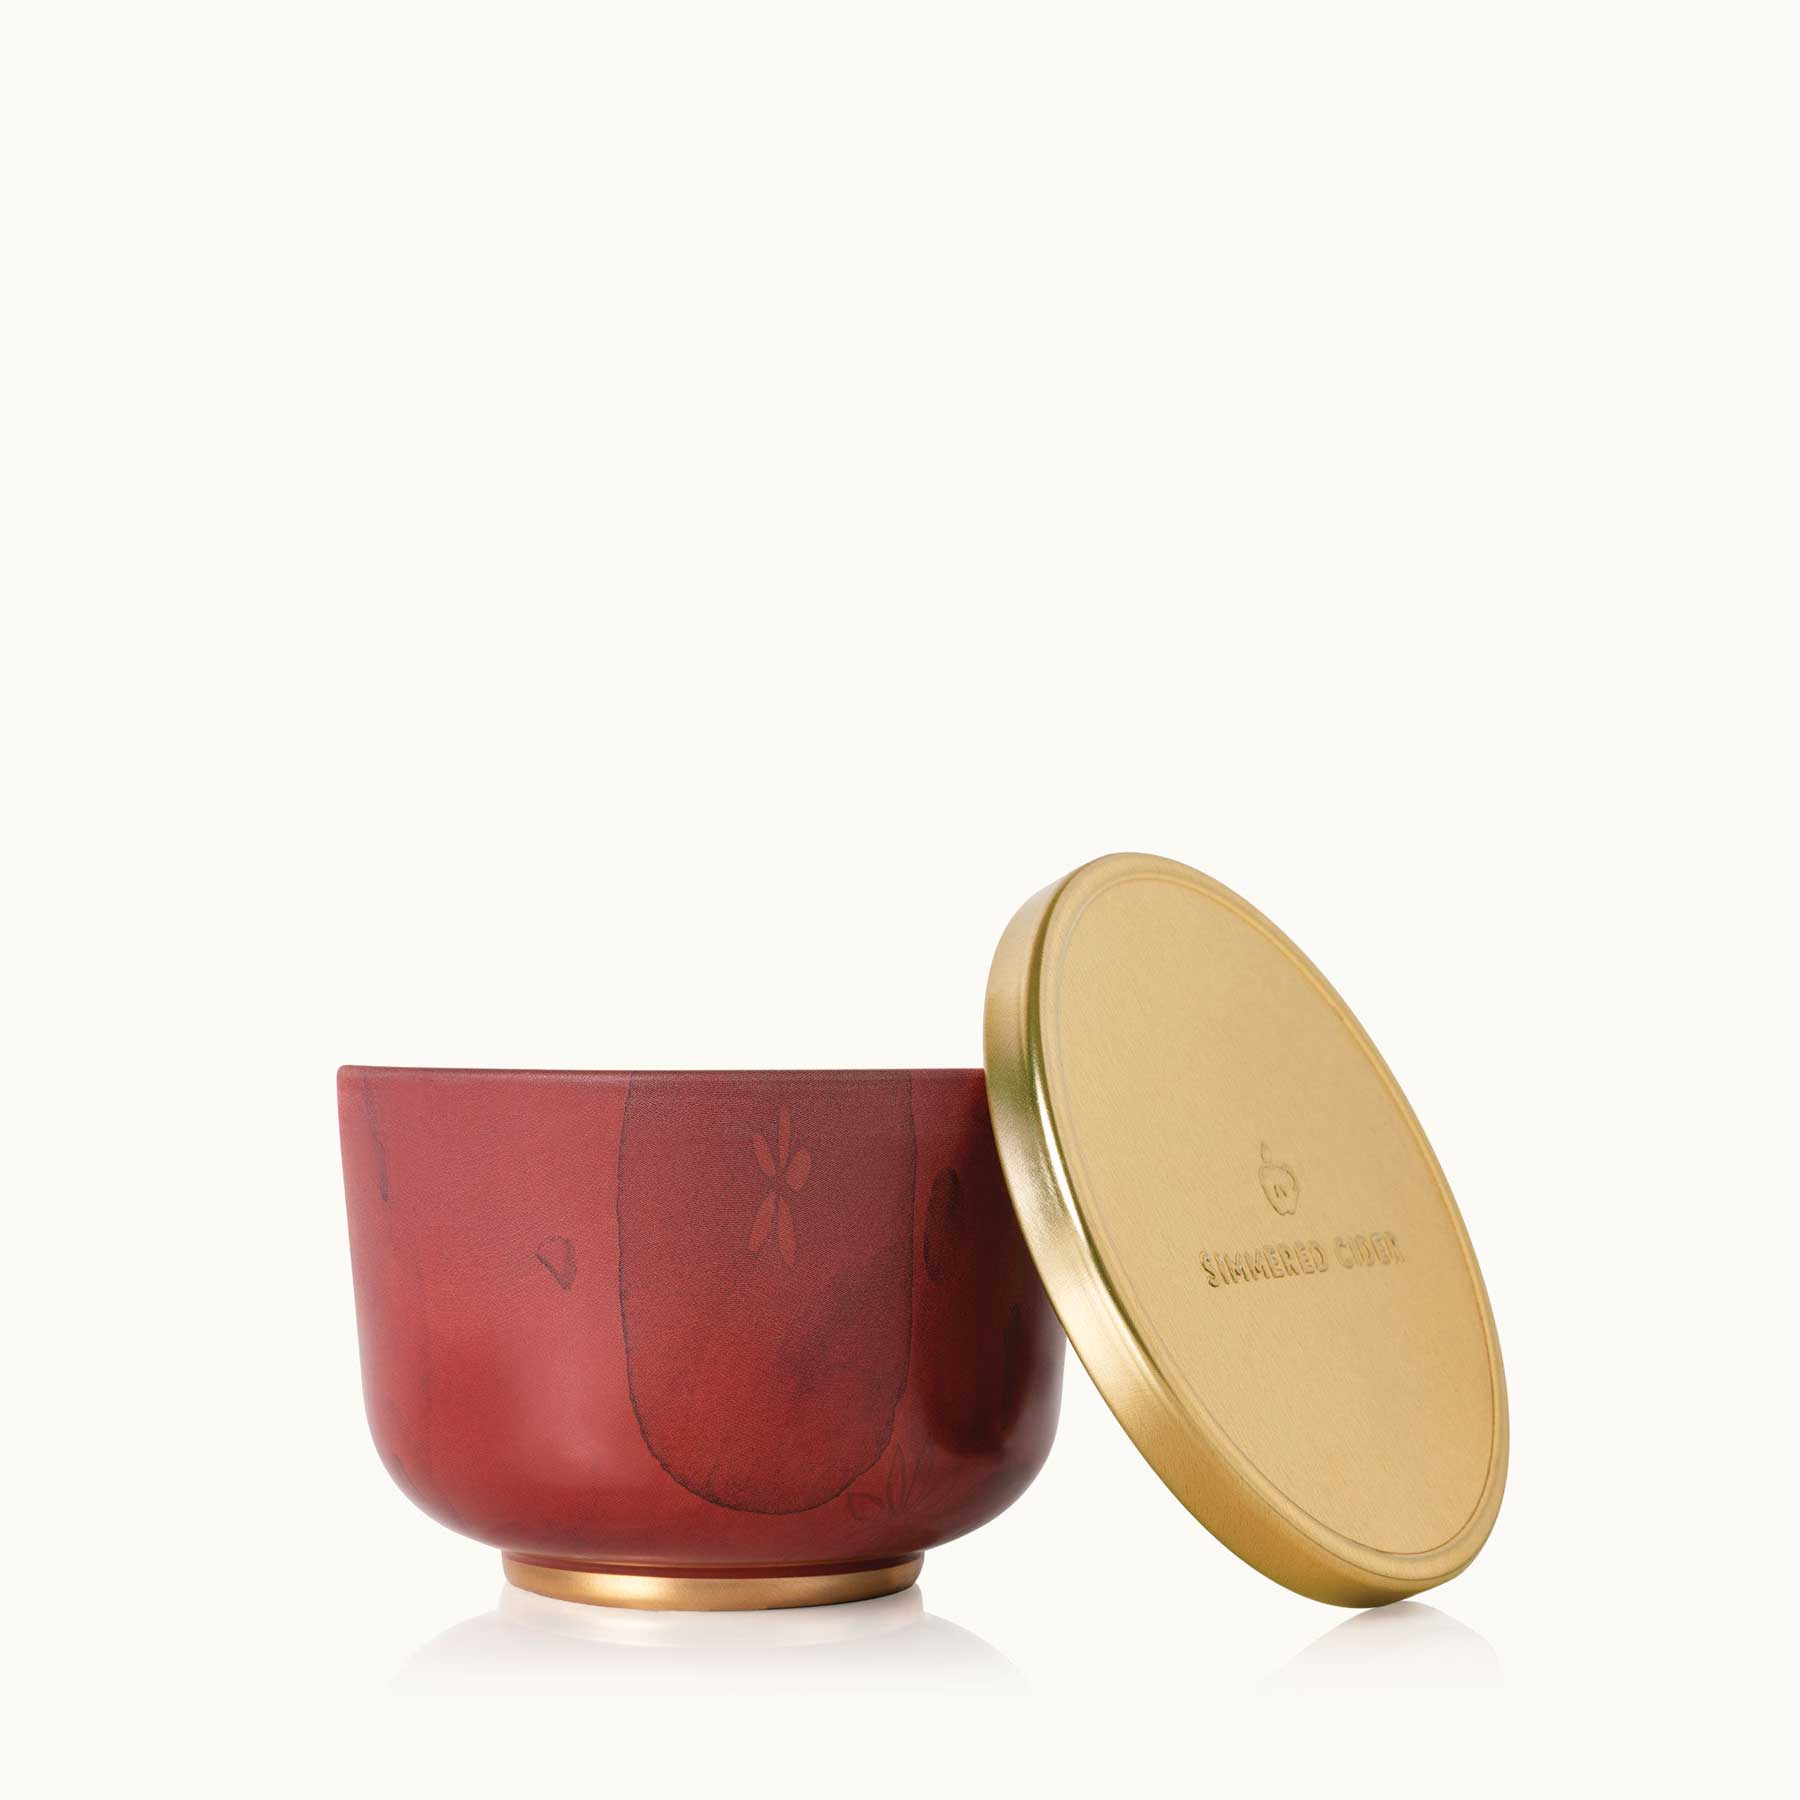 Thymes - Simmered Cider Candle Tin with Gold Lid